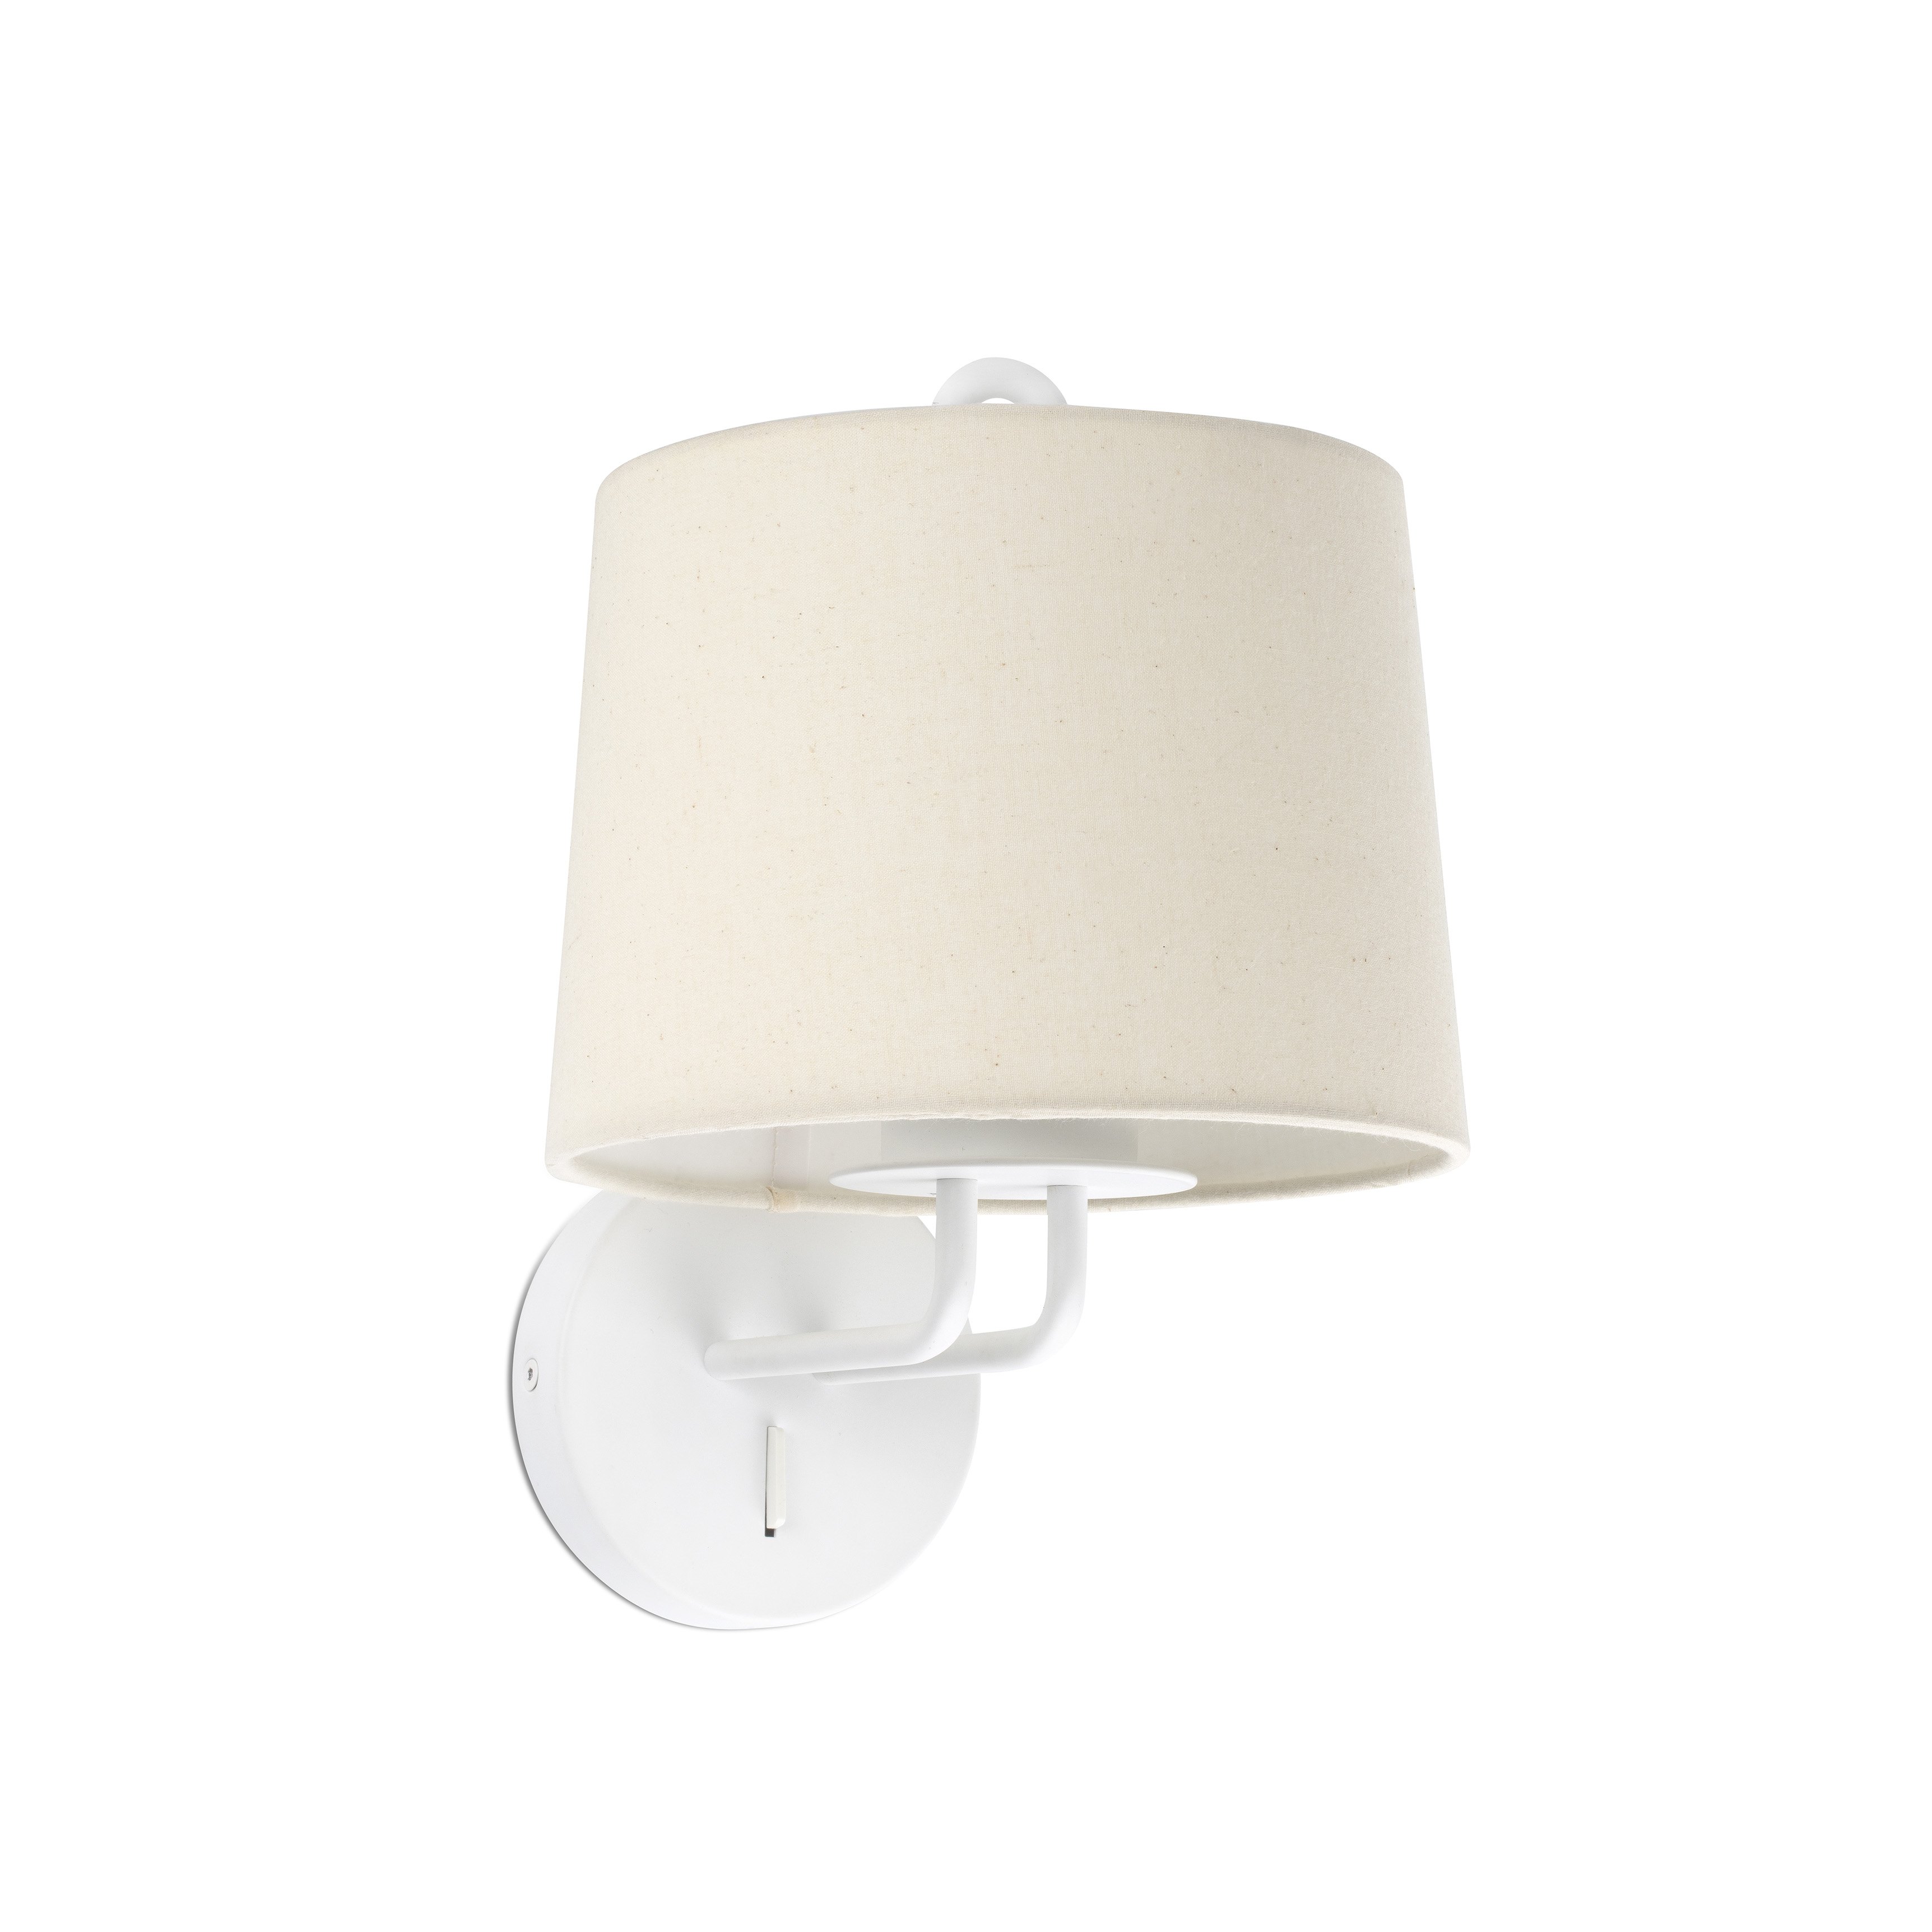 MONTREAL WHITE WALL LAMP BEIGE LAMPSHADE